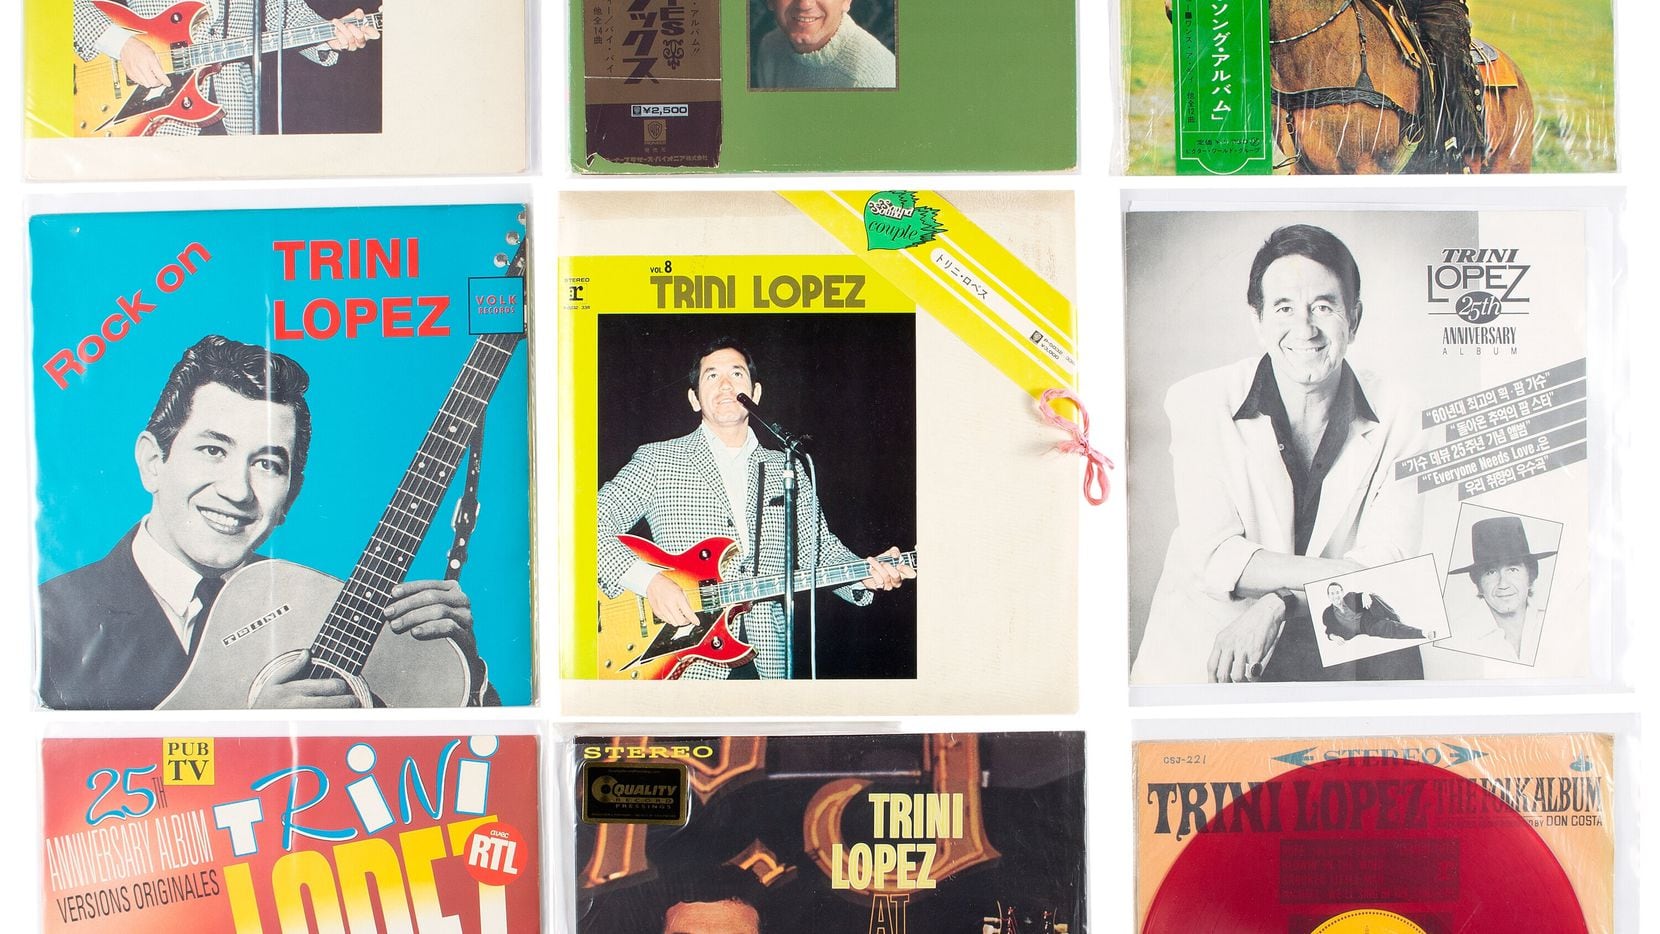 Trini López memorabilia is bound for auction at Dallas' Heritage Auctions. These albums are from the singer's personal collection.